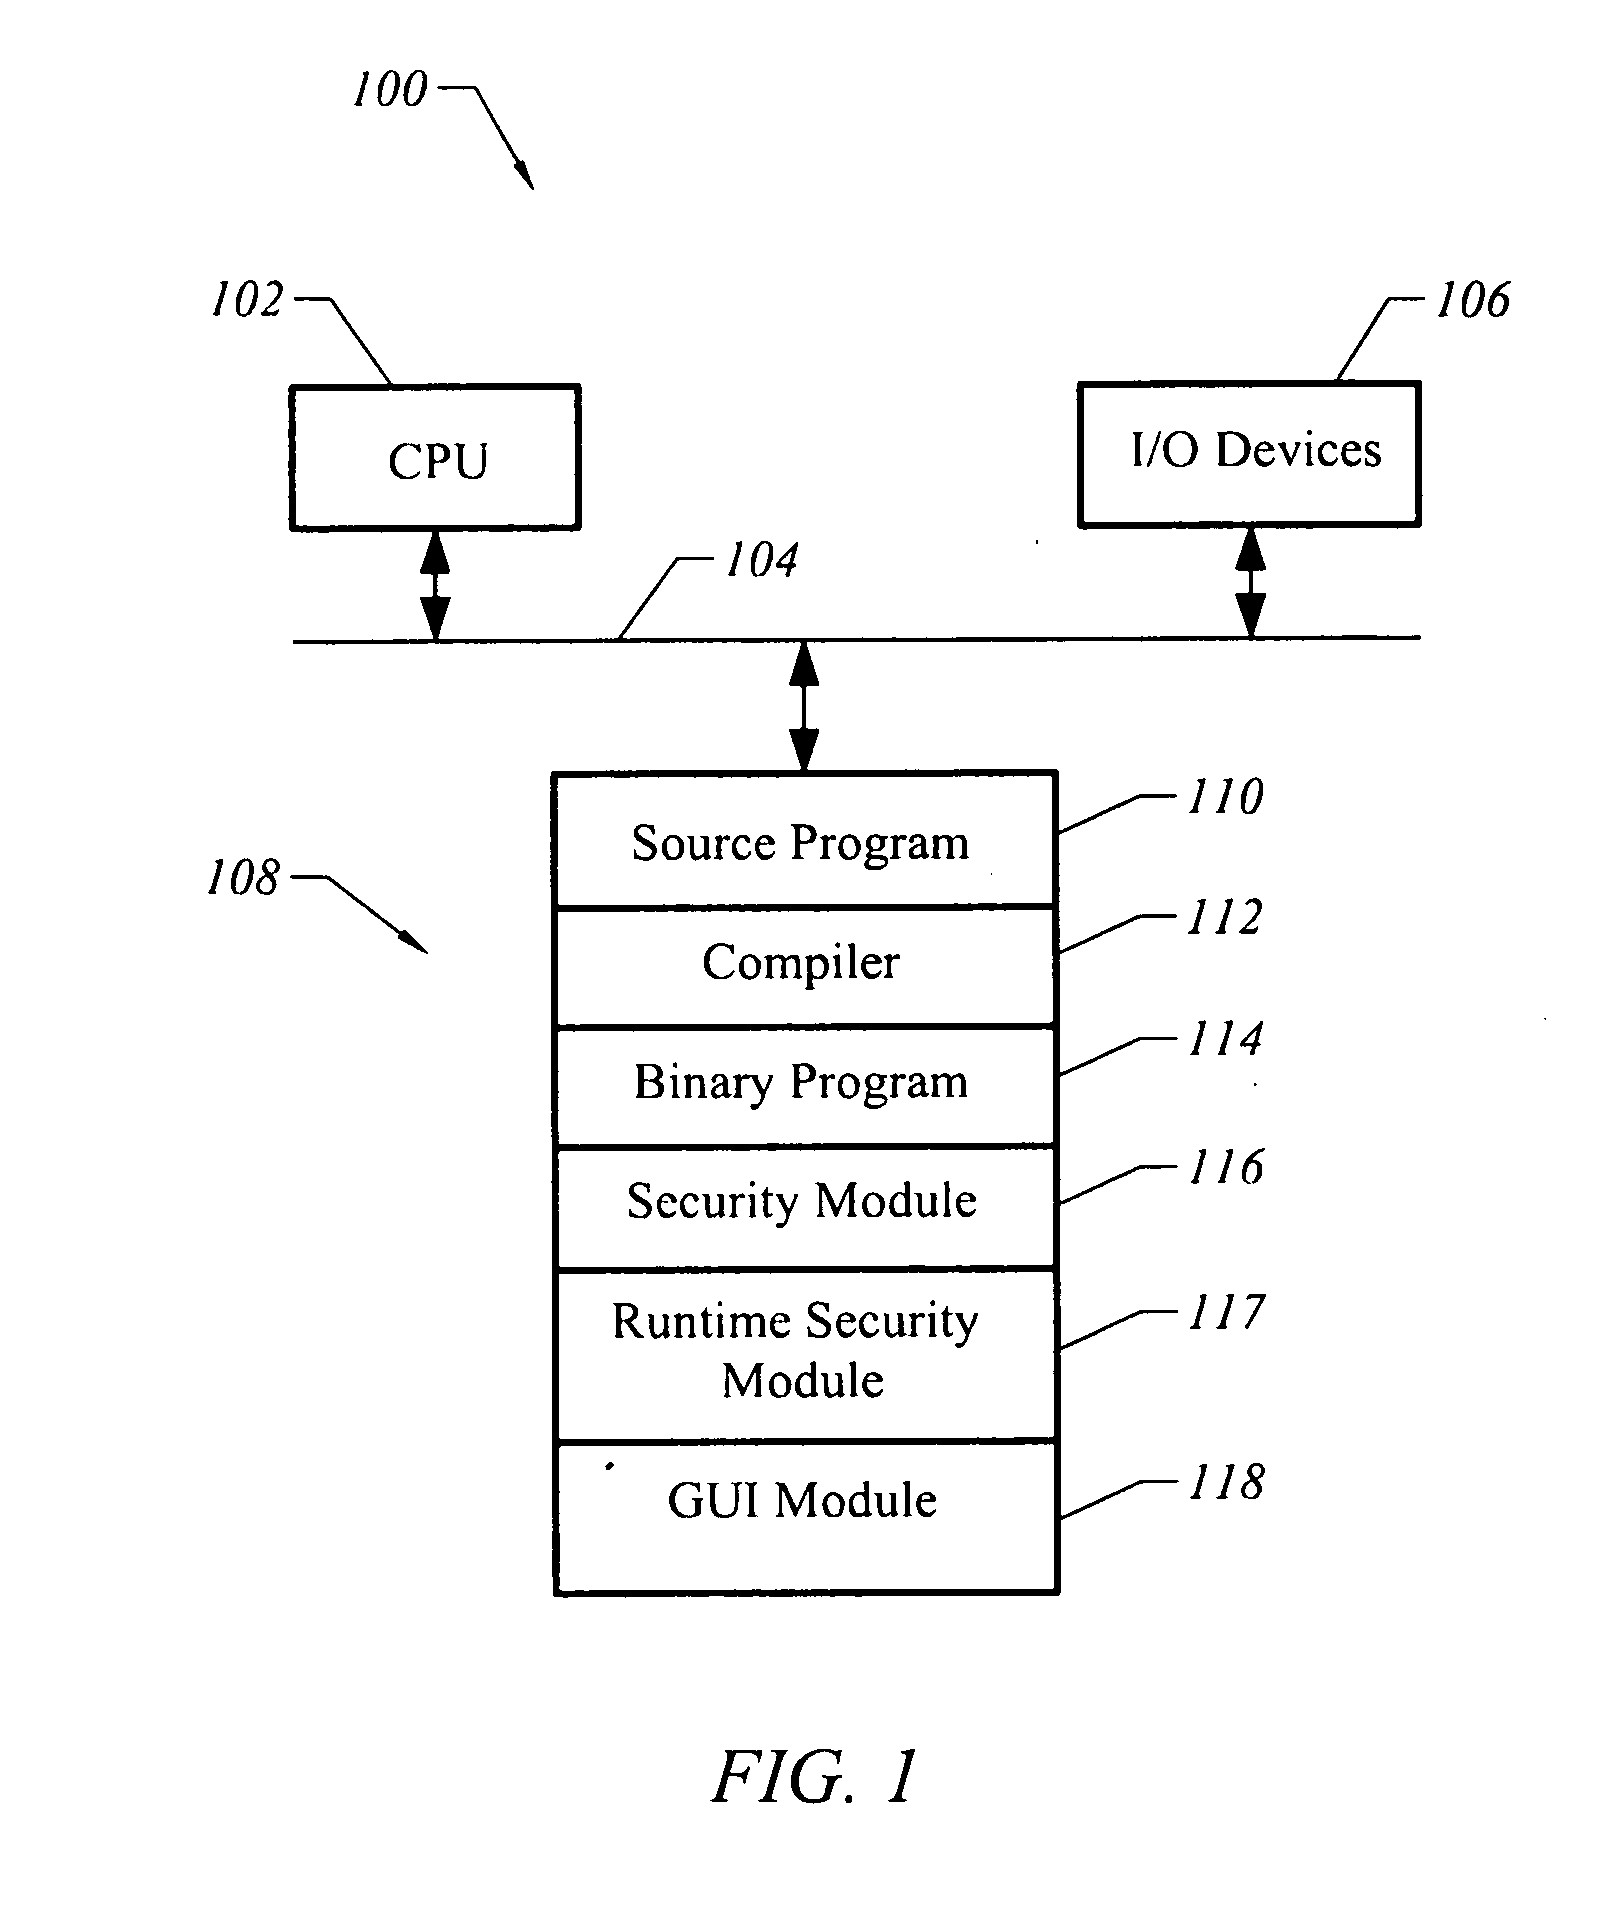 Apparatus and method for analyzing and supplementing a program to provide security